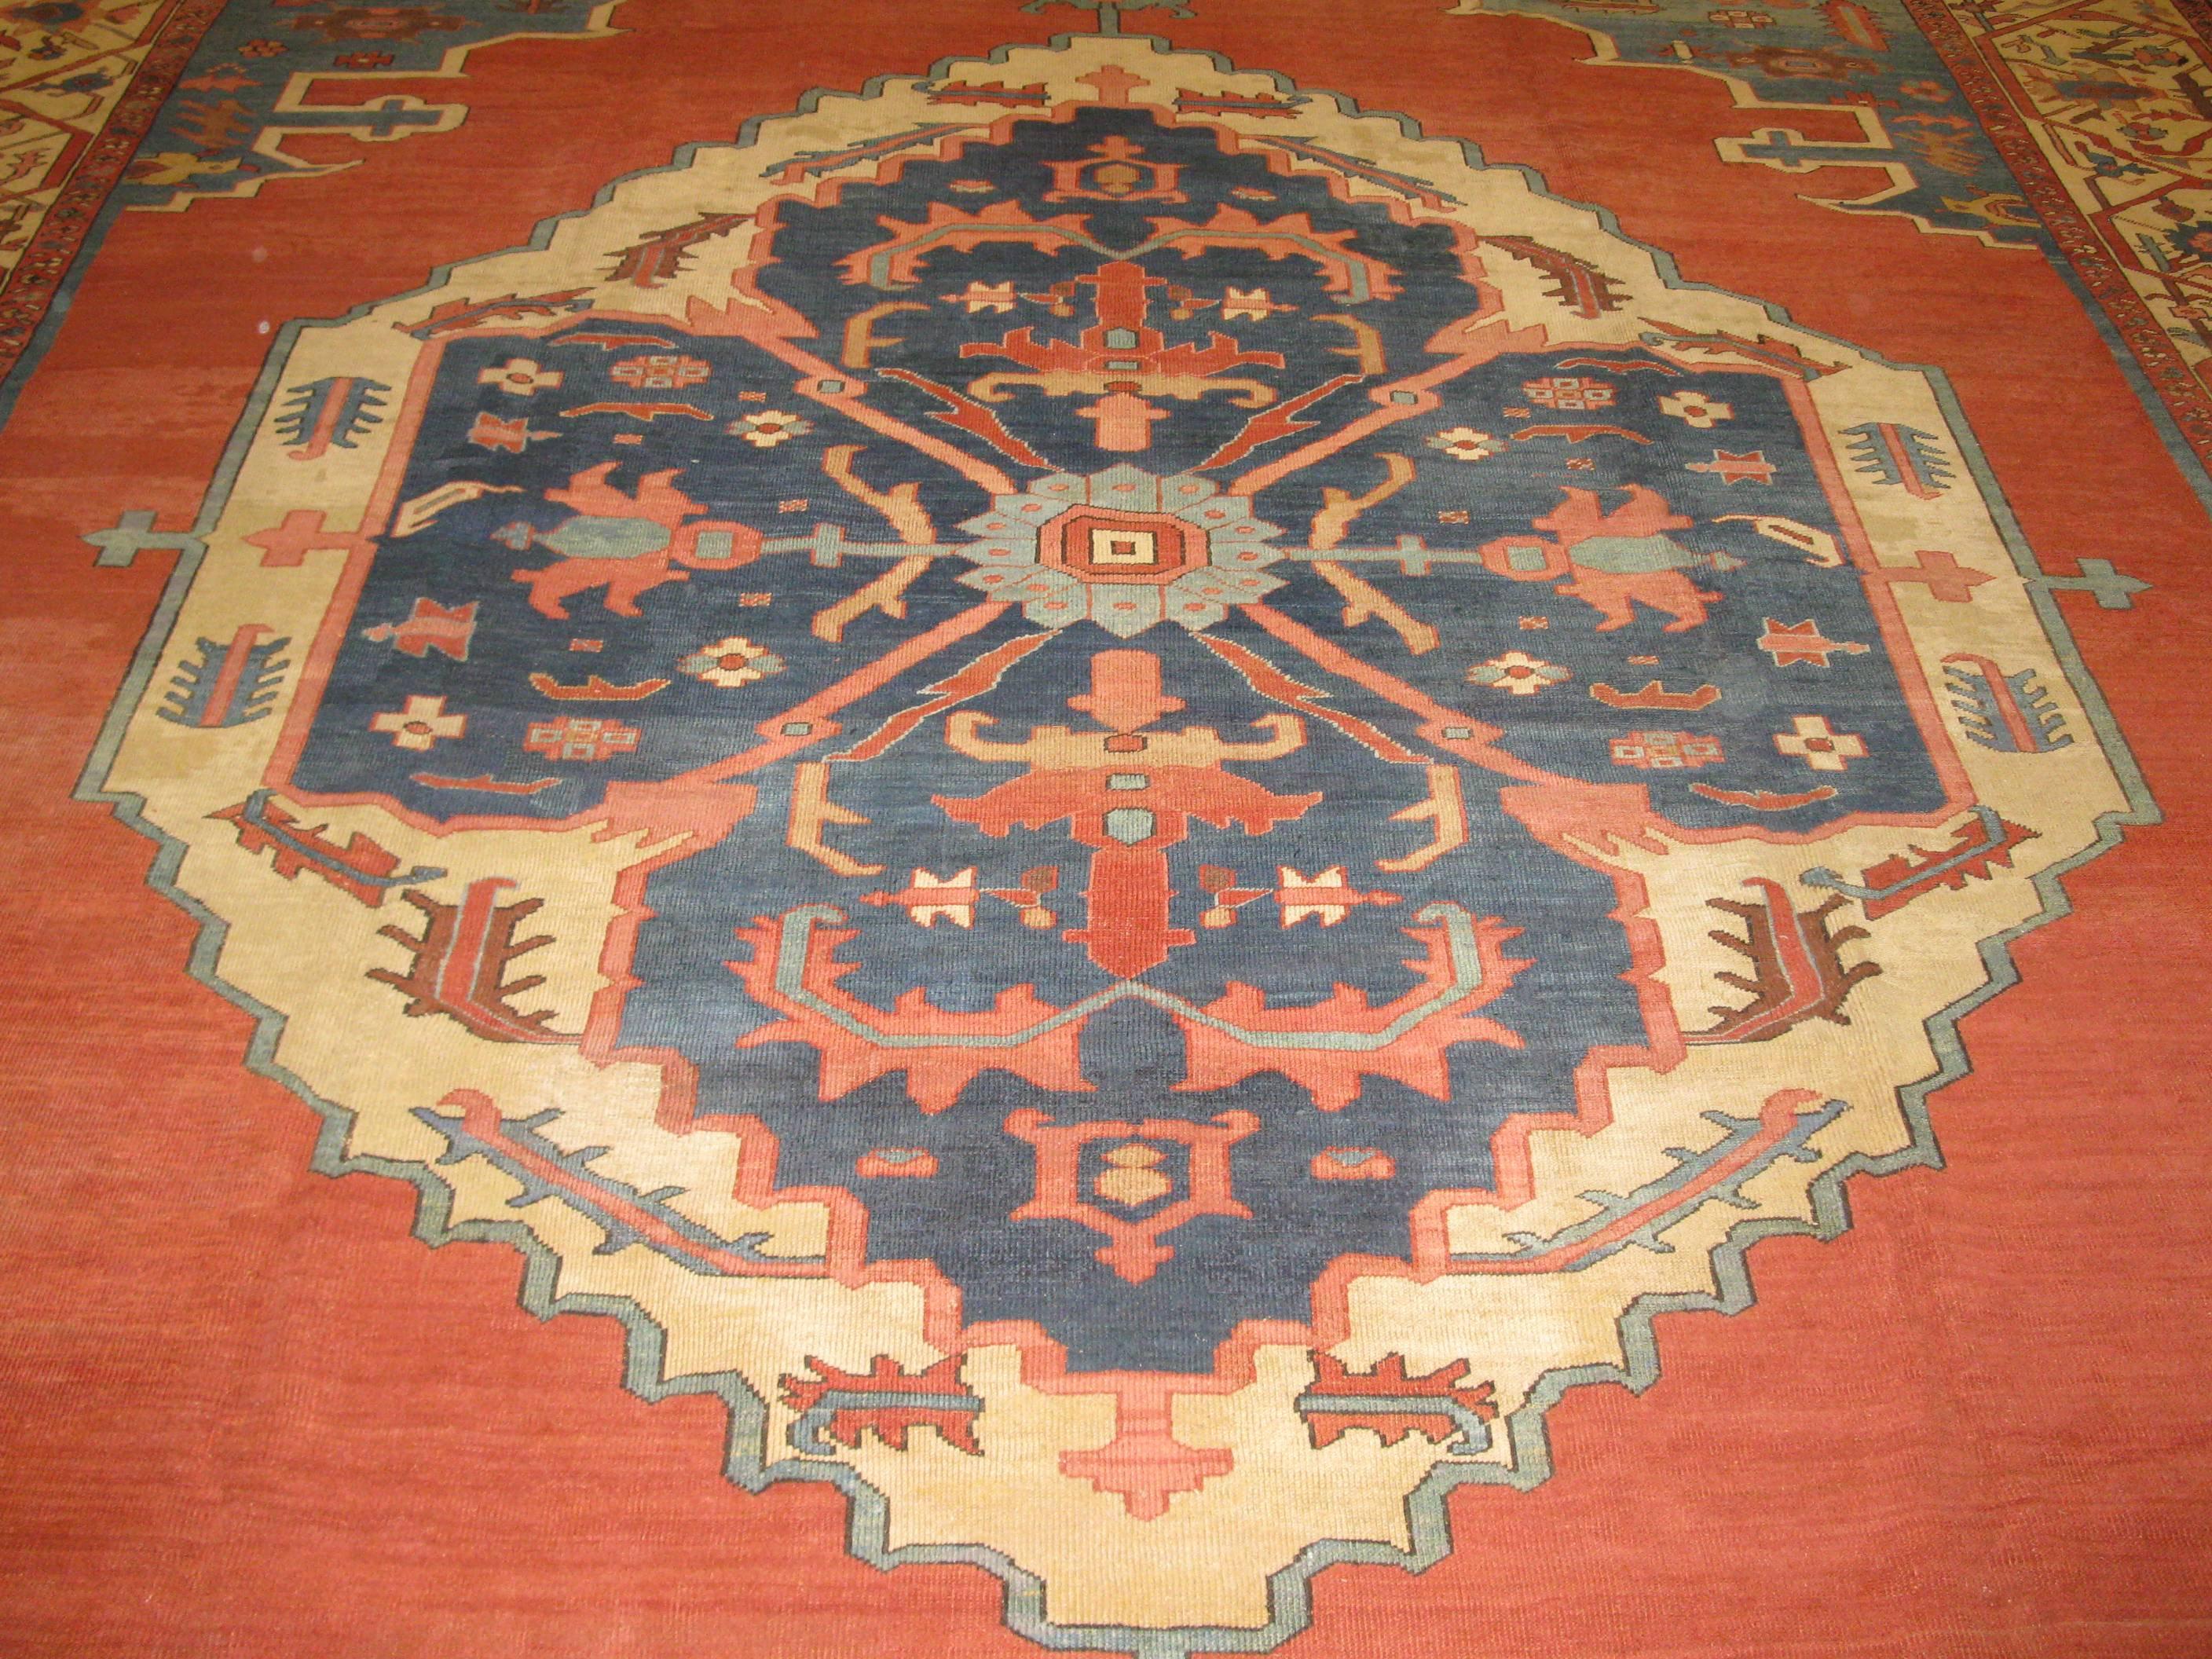 This is a beautiful example of the late 19th century antique Persian Bakhshayesh rugs with a bold medallion on an open solid brick red color background. The rug is in great shape, circa 1890.